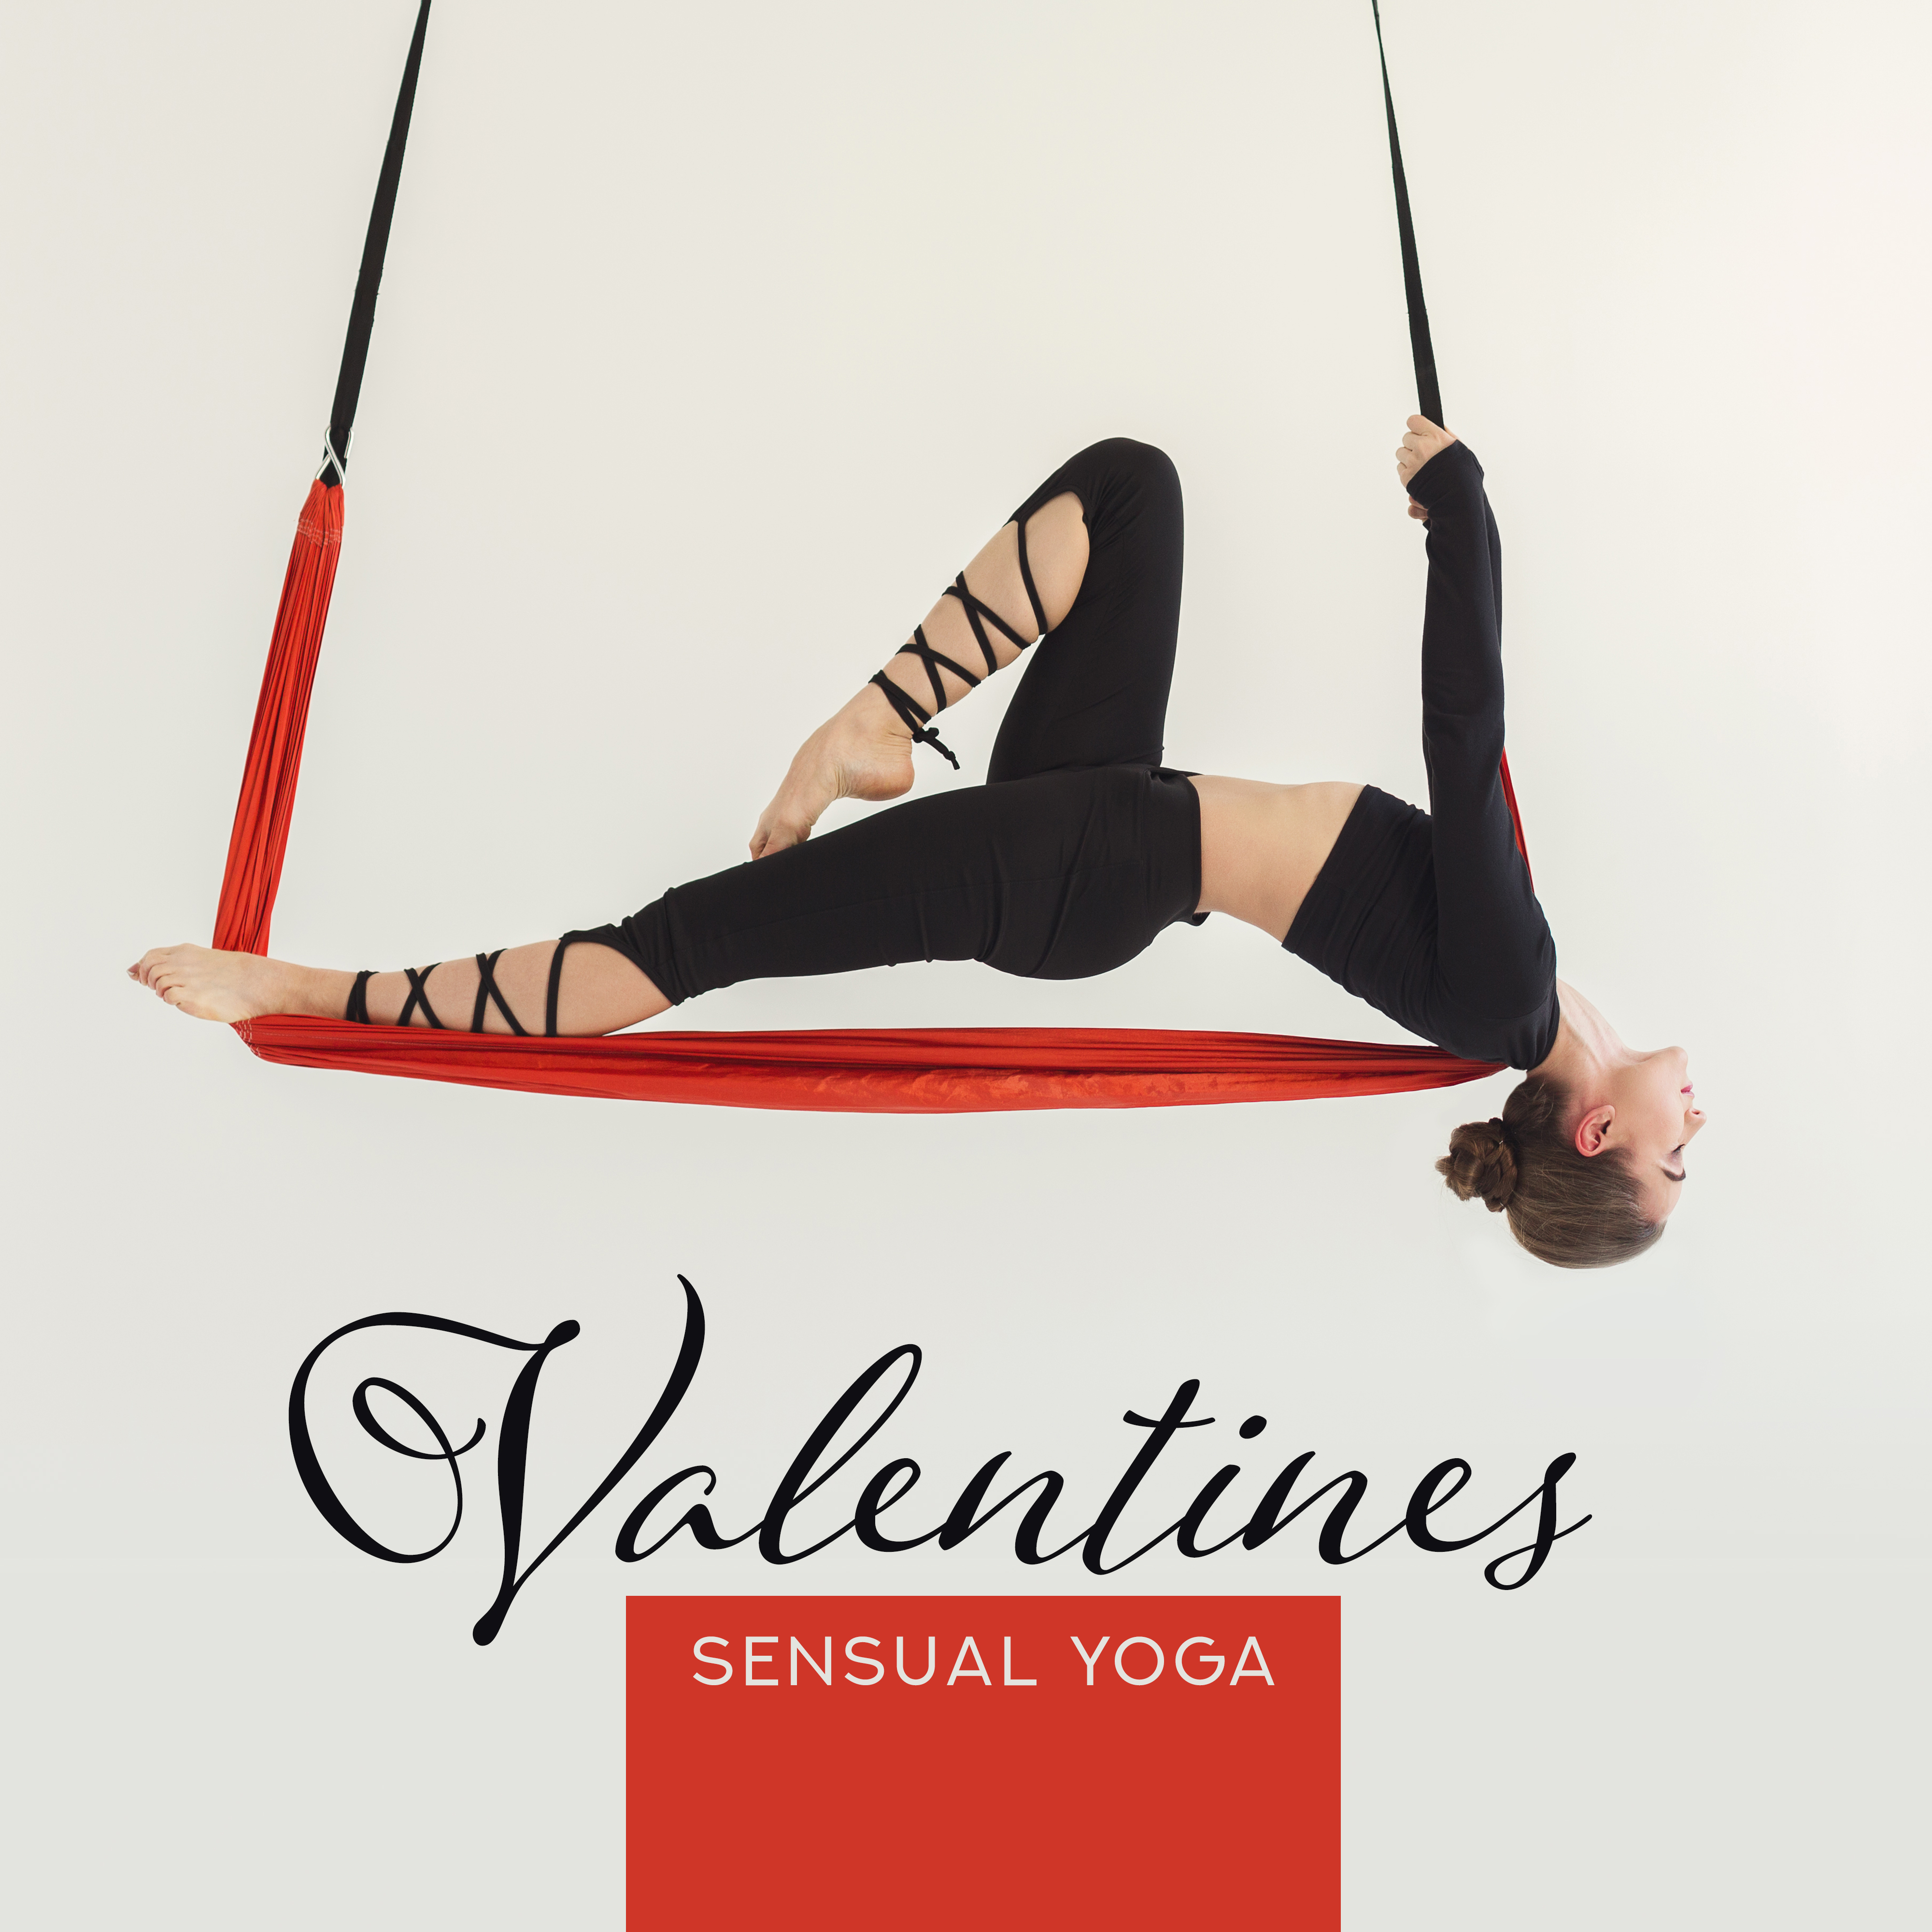 Valentines Sensual Yoga – Healing Music for Valentines Day, Tantric Massage, Erotic Relaxation, Deep Meditation, **** Yoga for Two